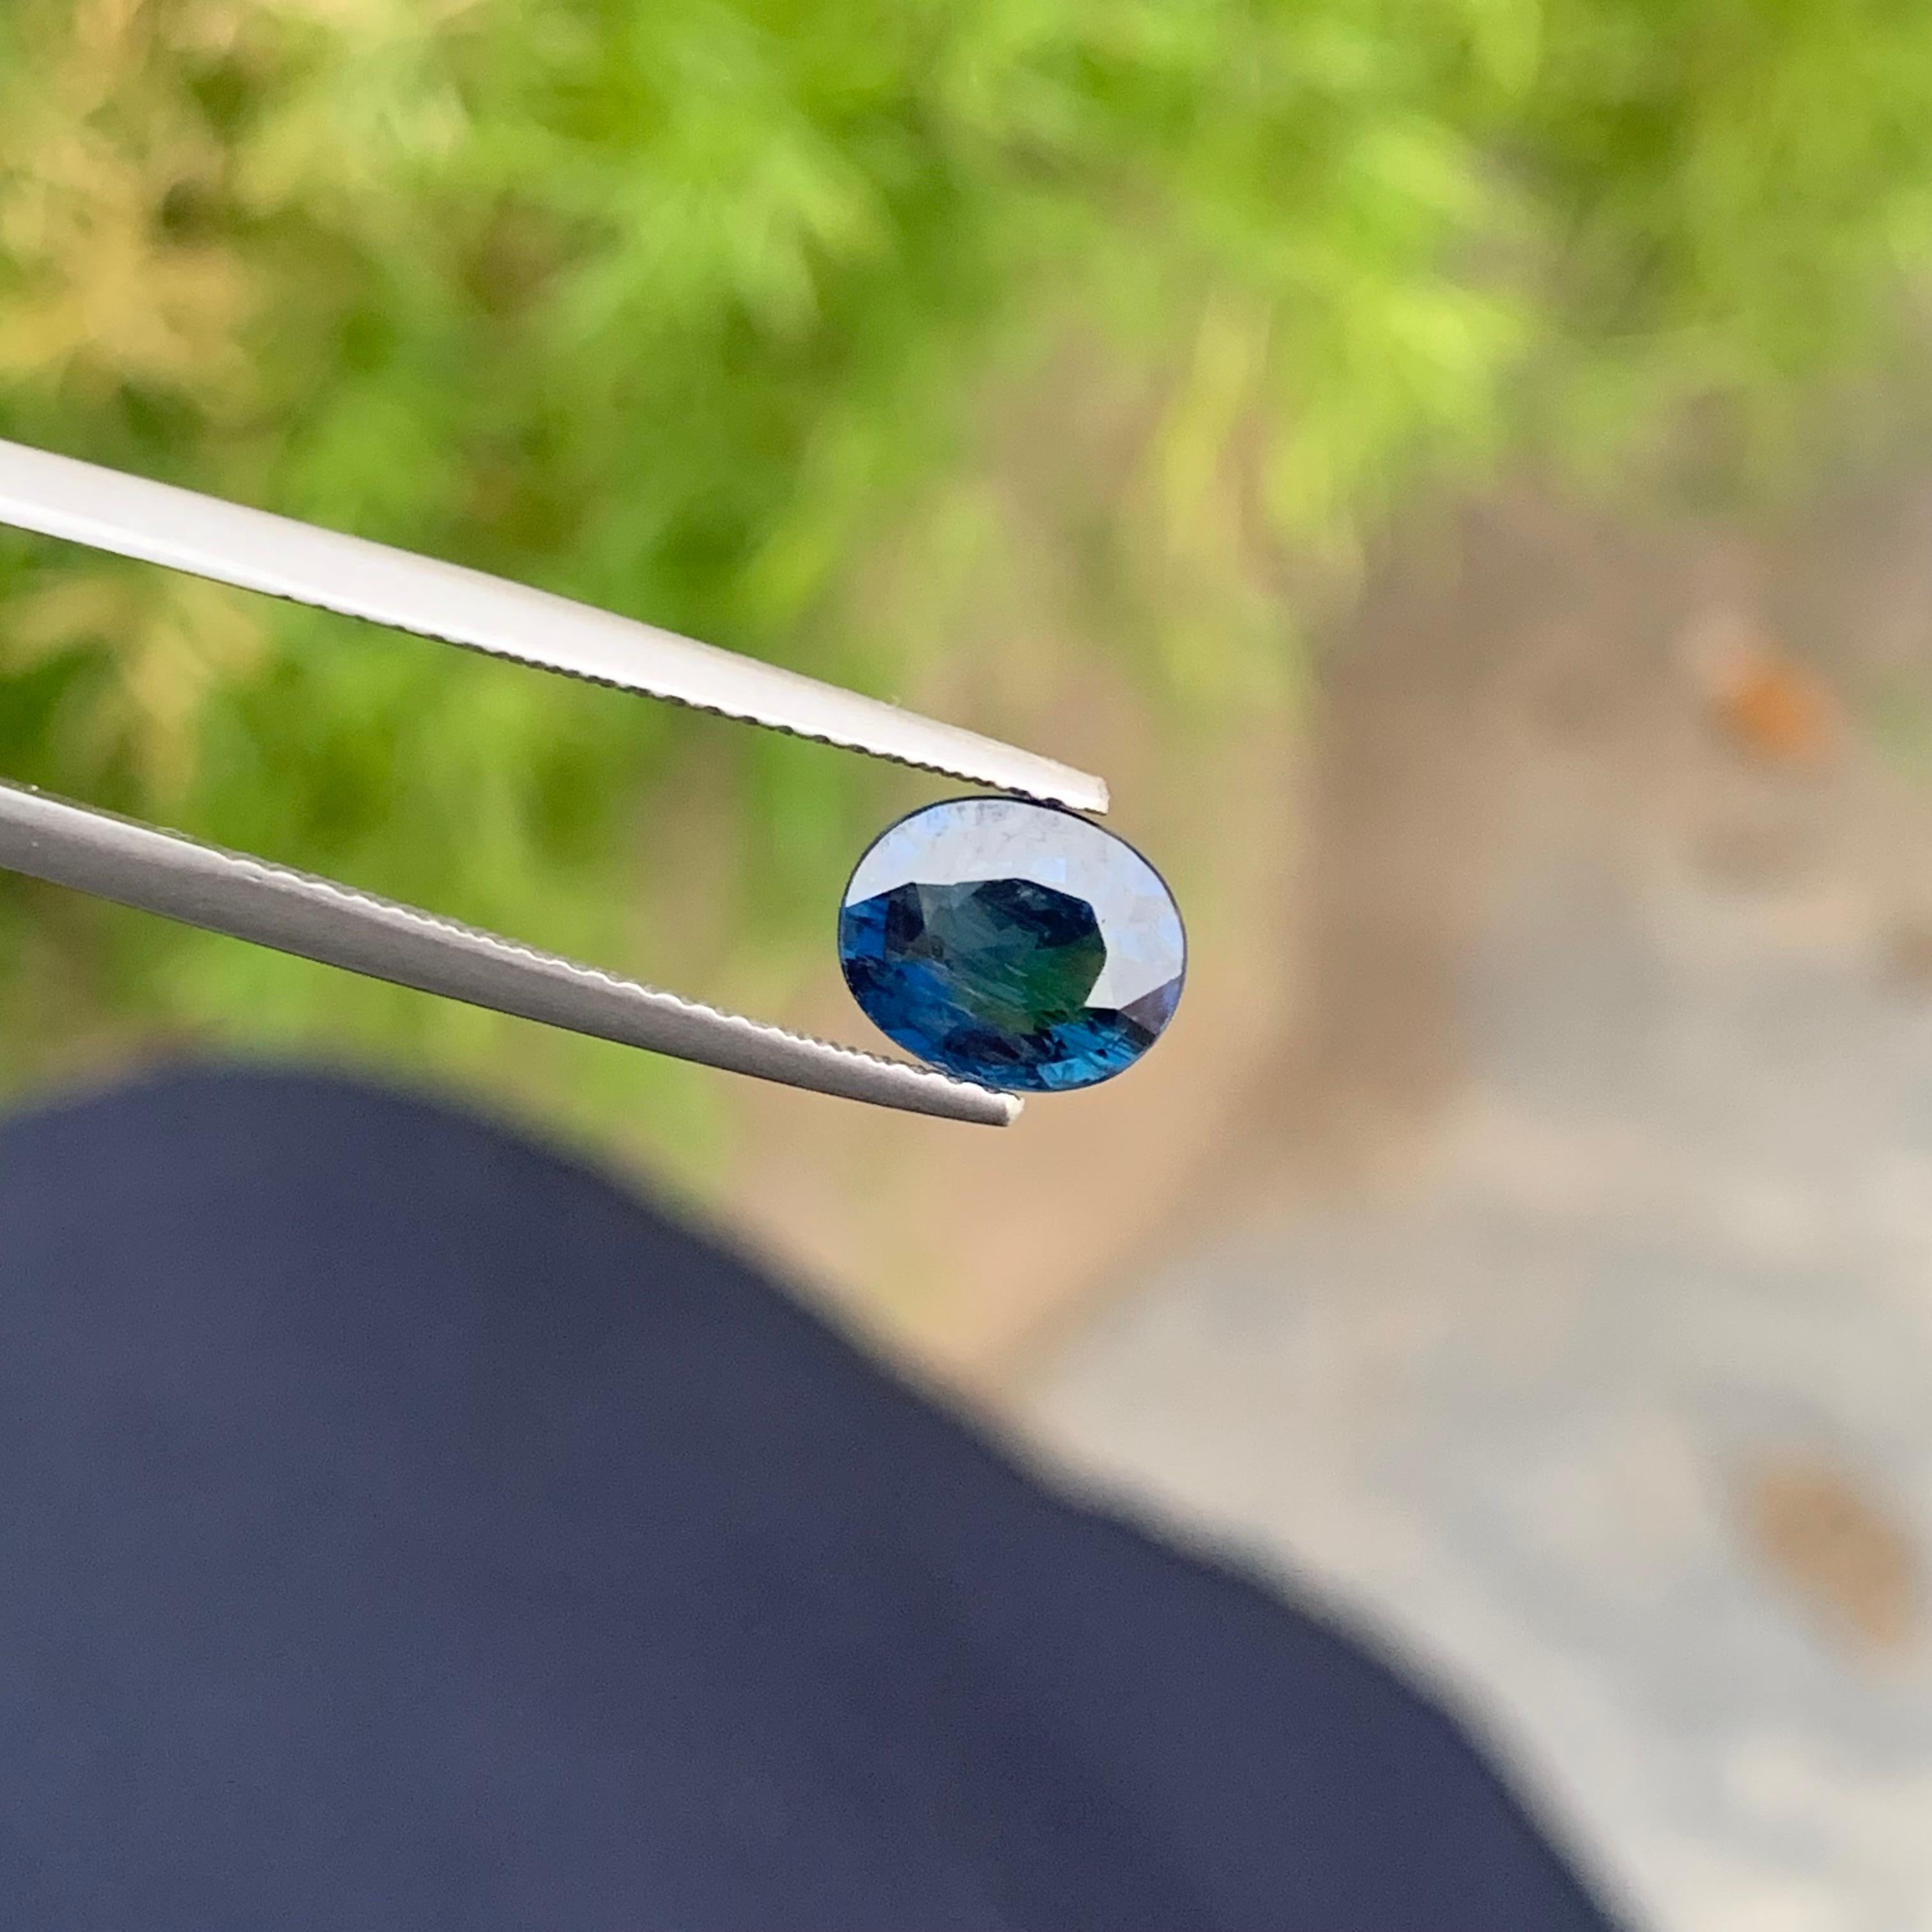 Stunning Blue Sapphire
Weight: 1.50 Carats
Dimension: 8x6,6x3.7 Mm
Origin: Africa
Shape: Oval
Color: Blue
Treatment: Non
Certificate: On Demand
.
Sapphires are known as the stones of wisdom and serenity. They are used to release mental tension and